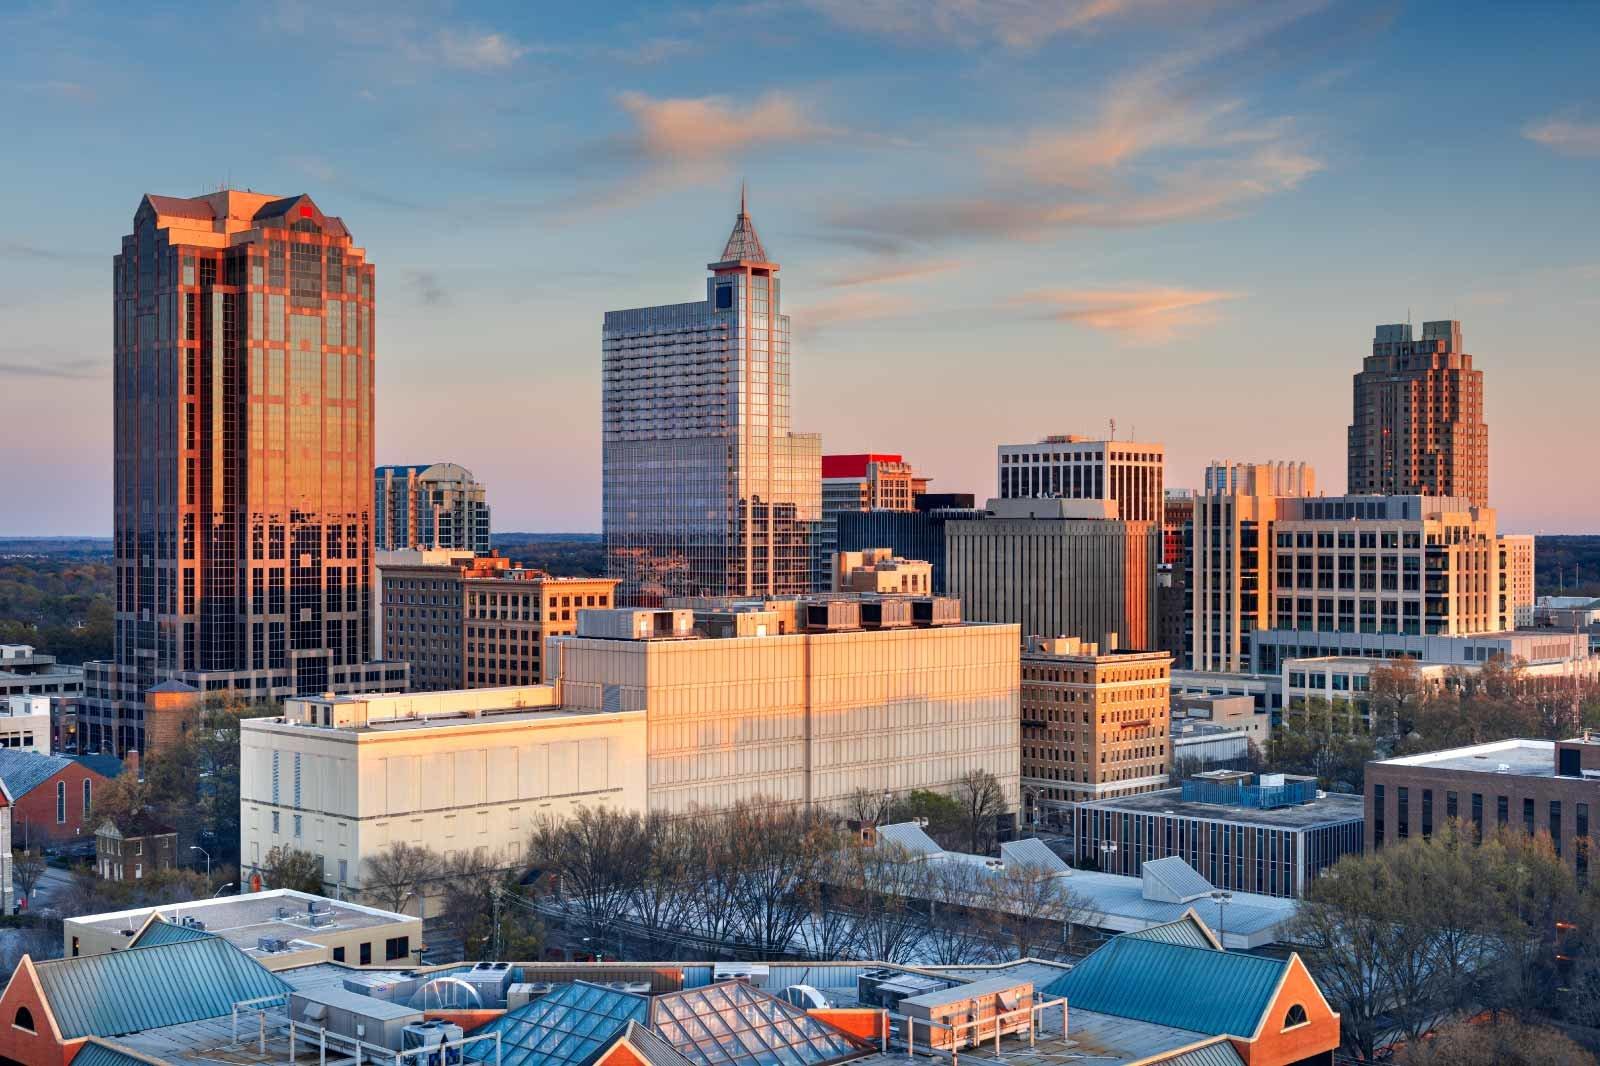 35 Unique Things To Do in Raleigh North Carolina in 2022